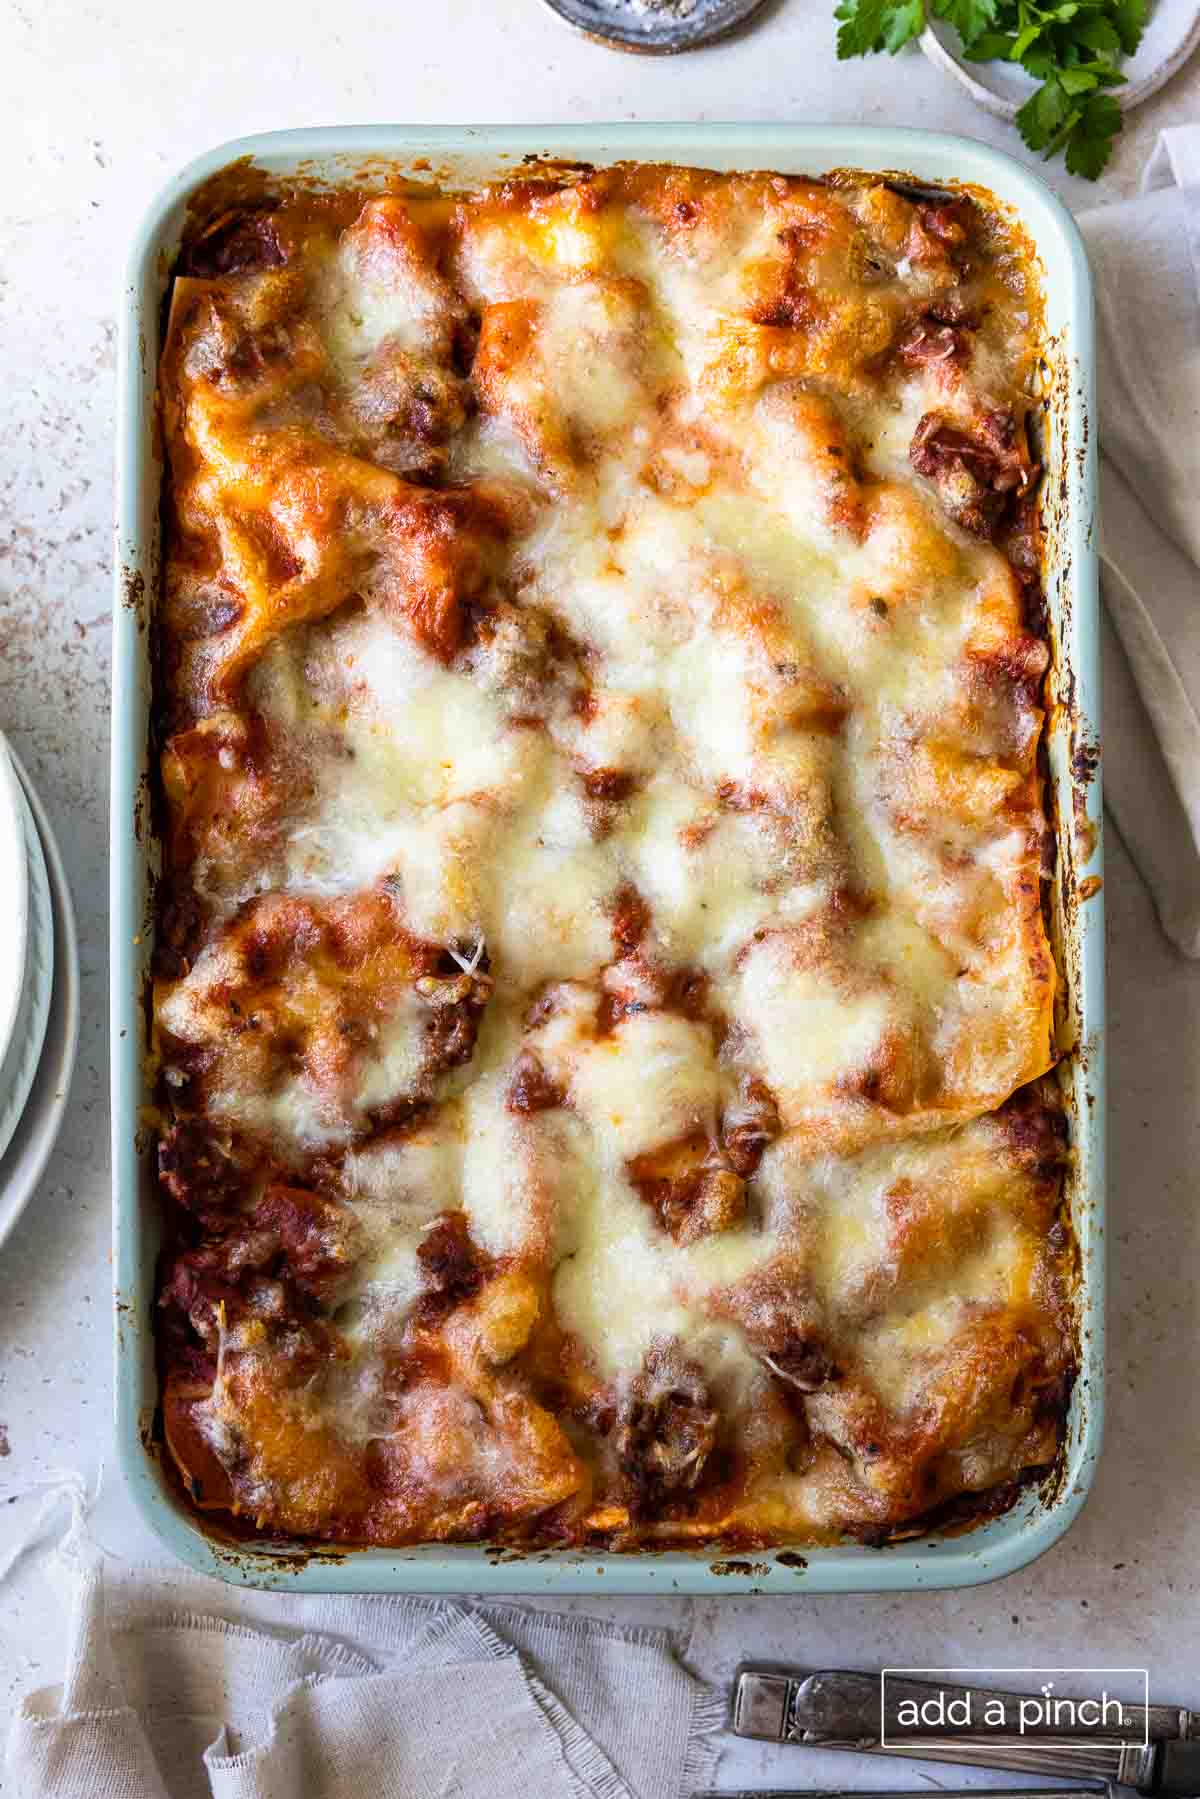 Image of baked lasagna in a 9x13 baking dish on a white background.